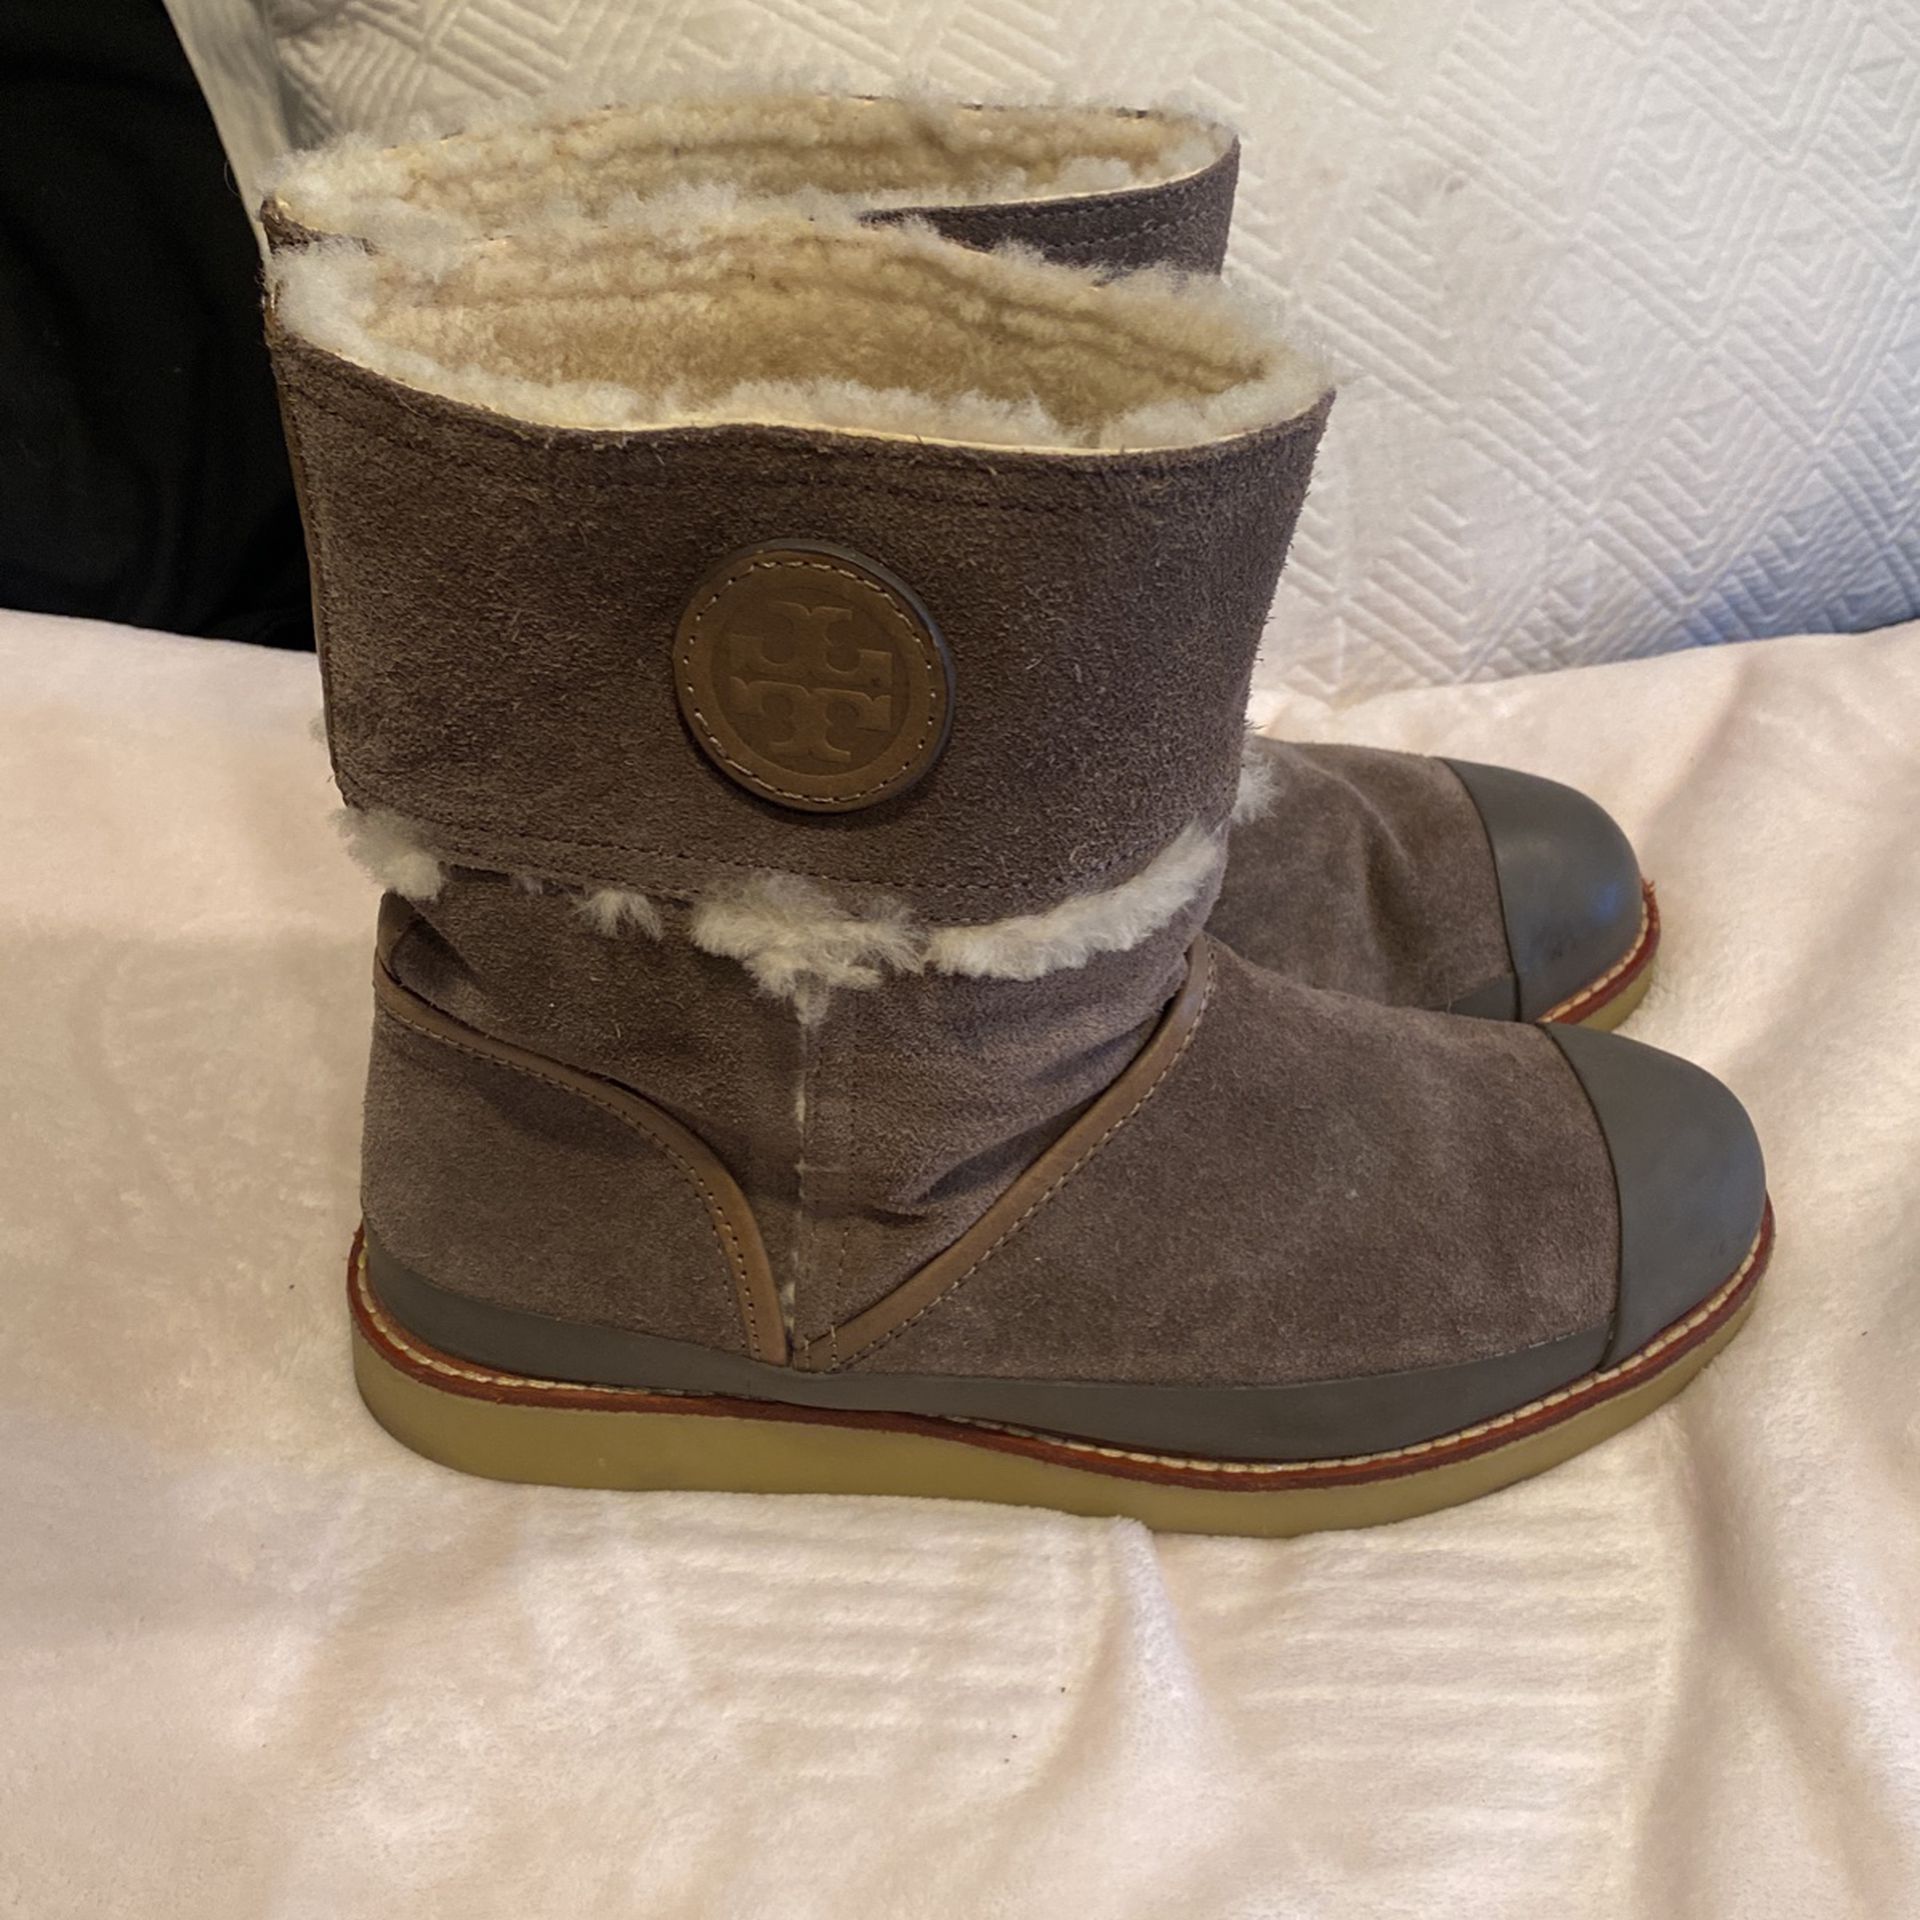 Tory Burch Tan Suede Lamb Boots Size 9